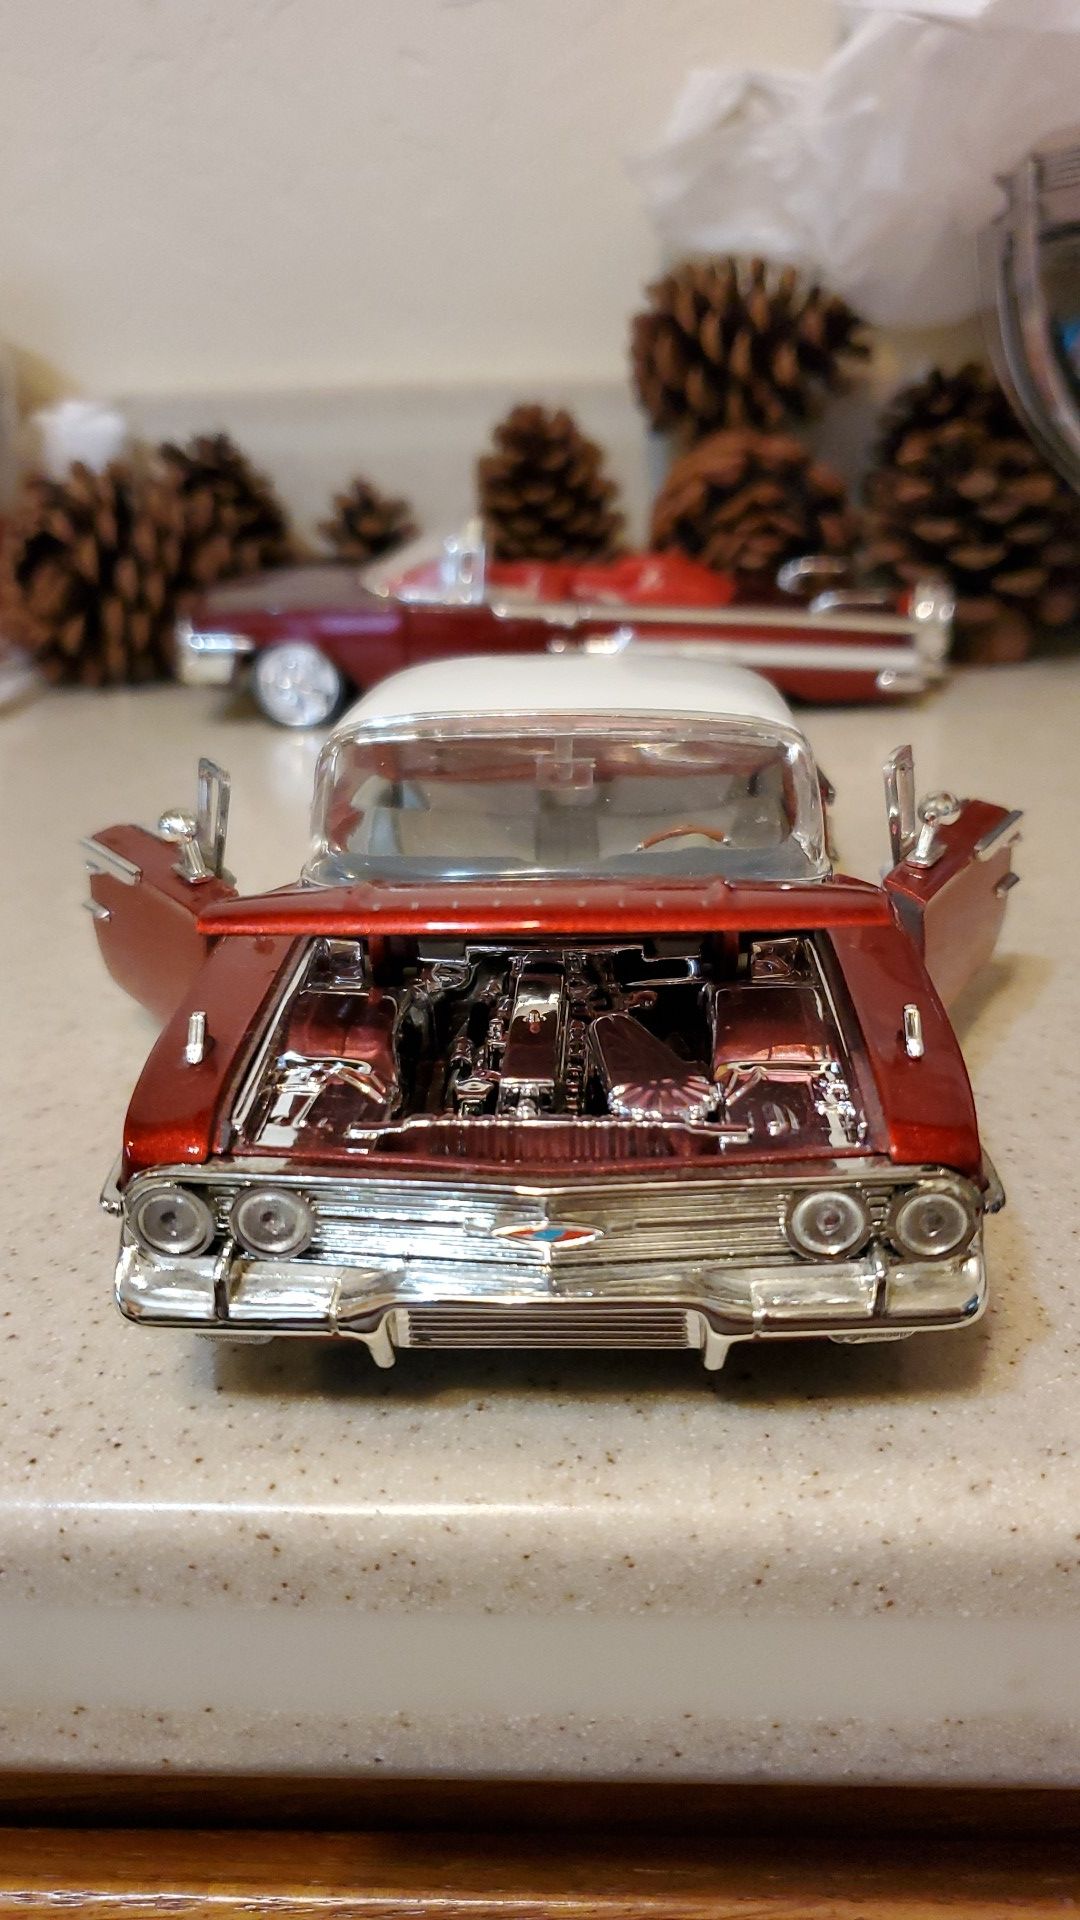 1:24 scale 1960 Chevy Impala, homies, general, antiques, toys, collectors